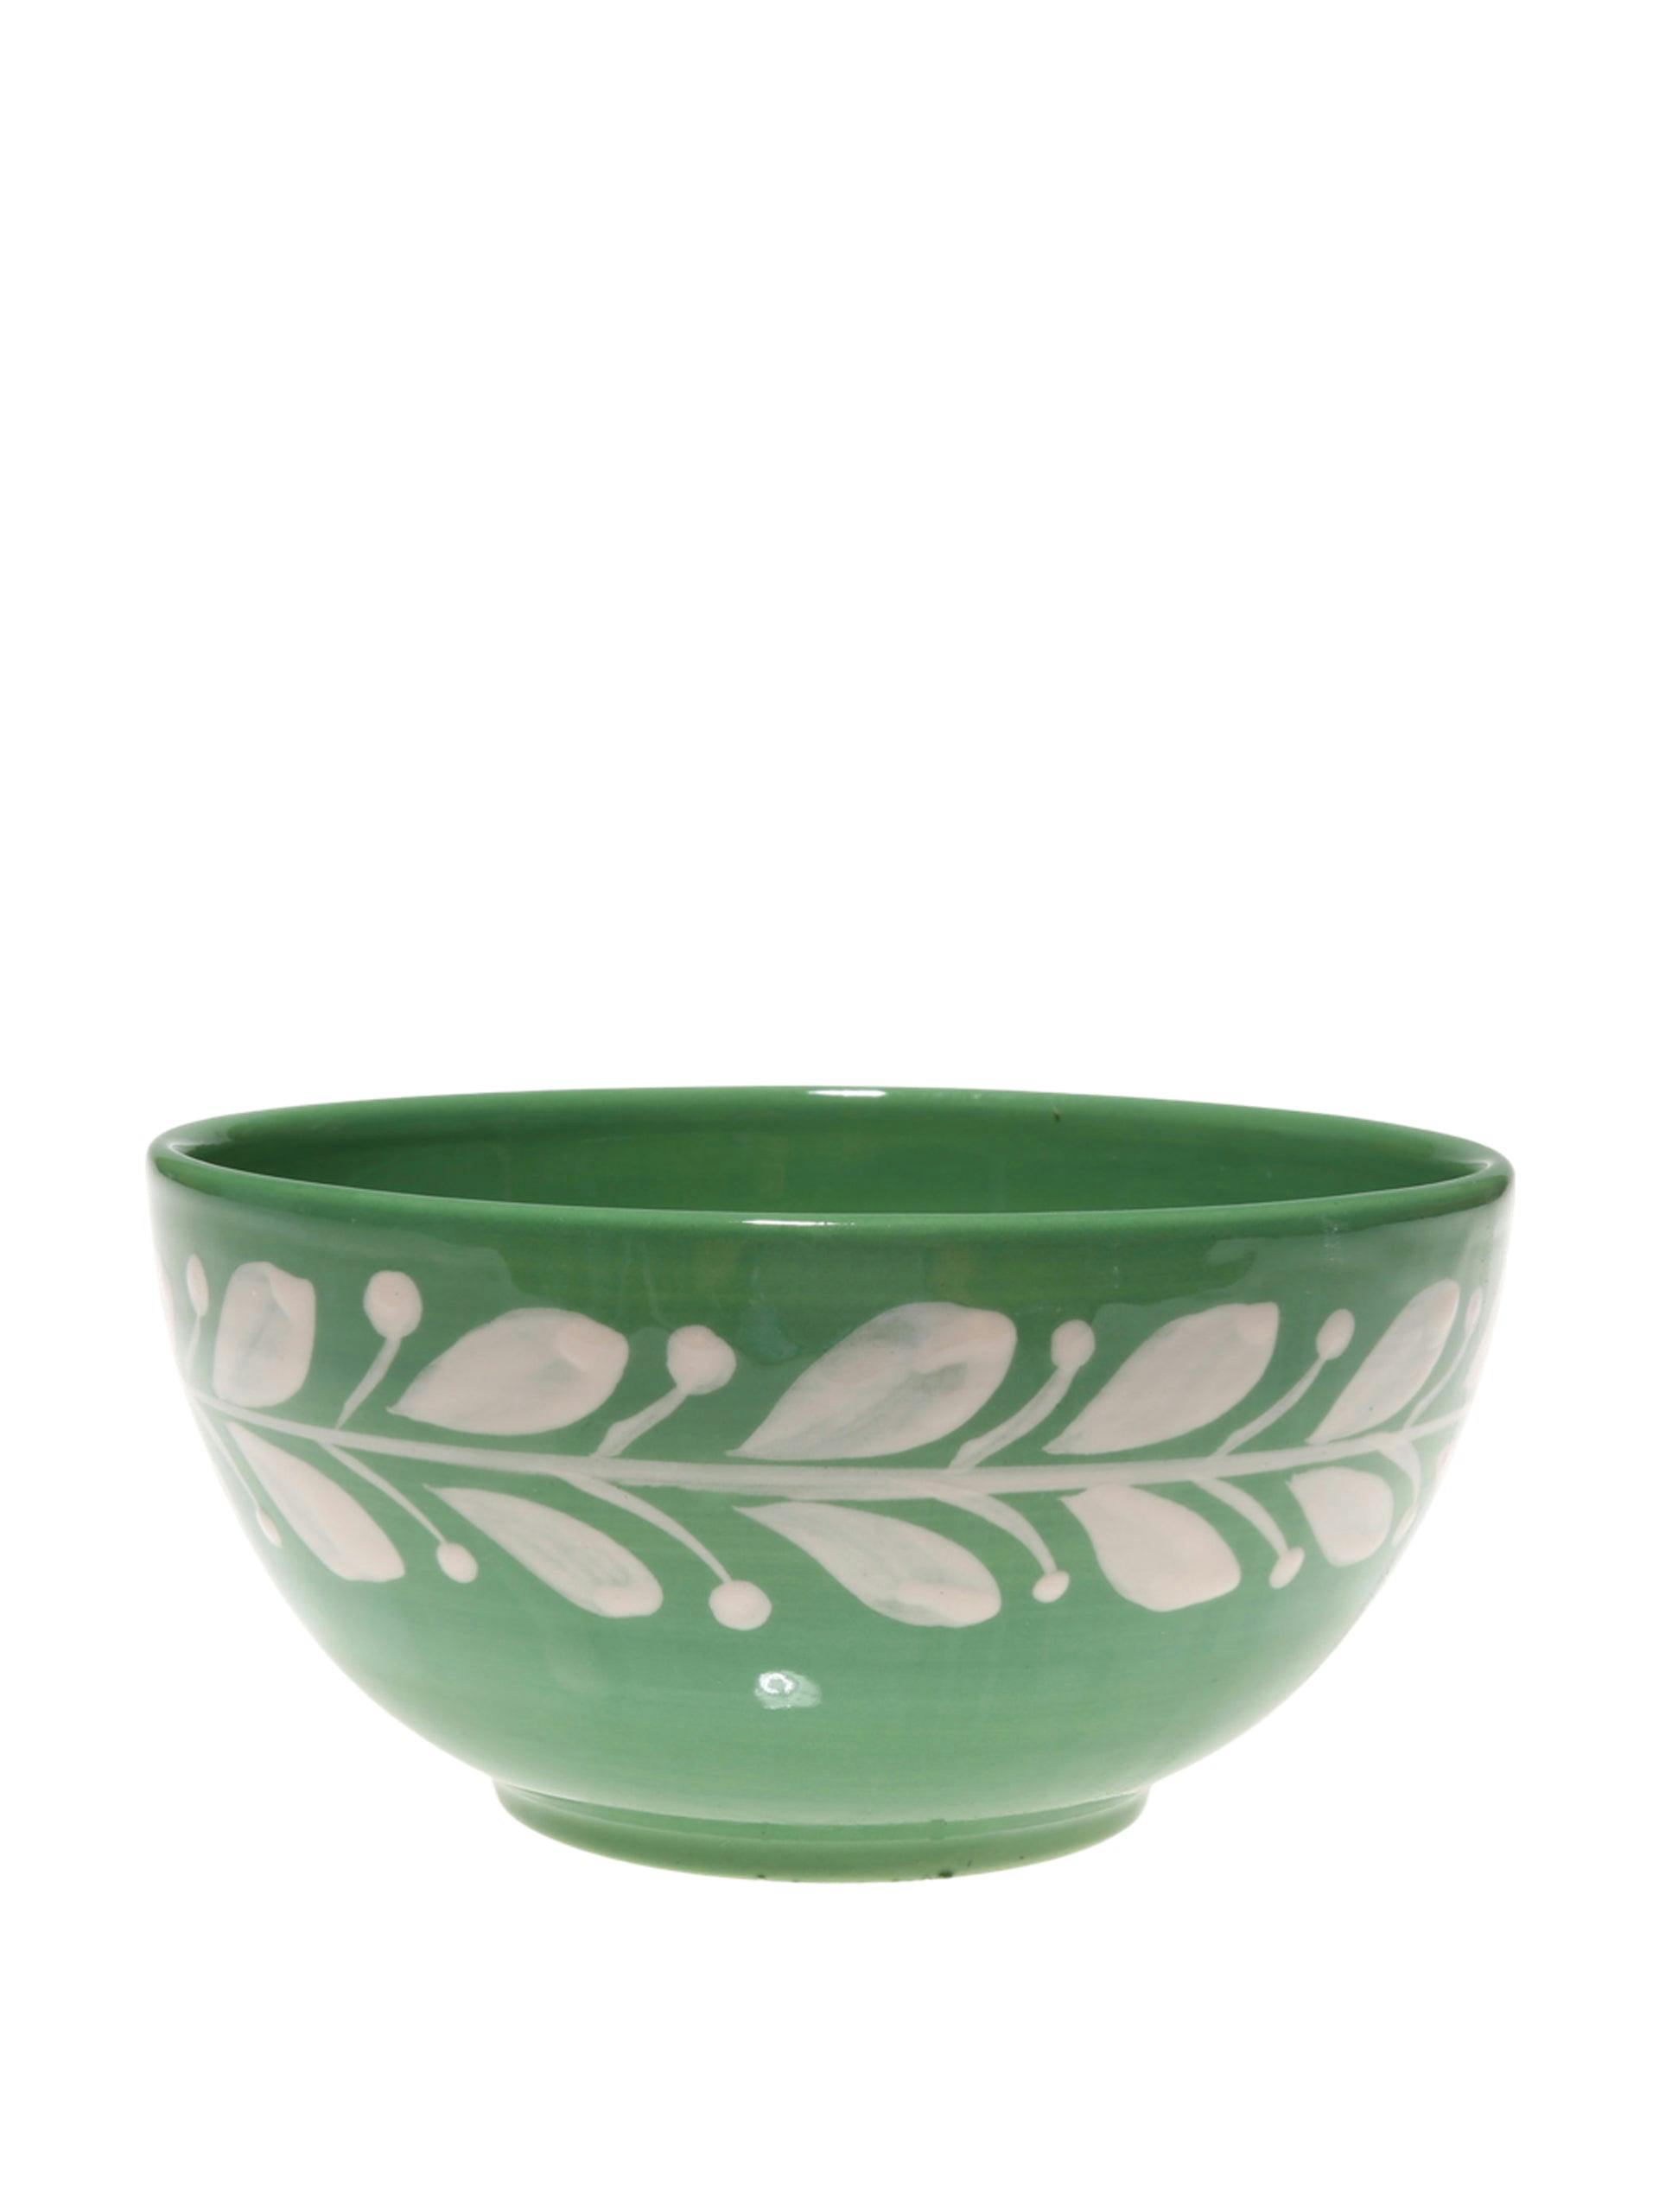 Anna reverse green cereal bowl